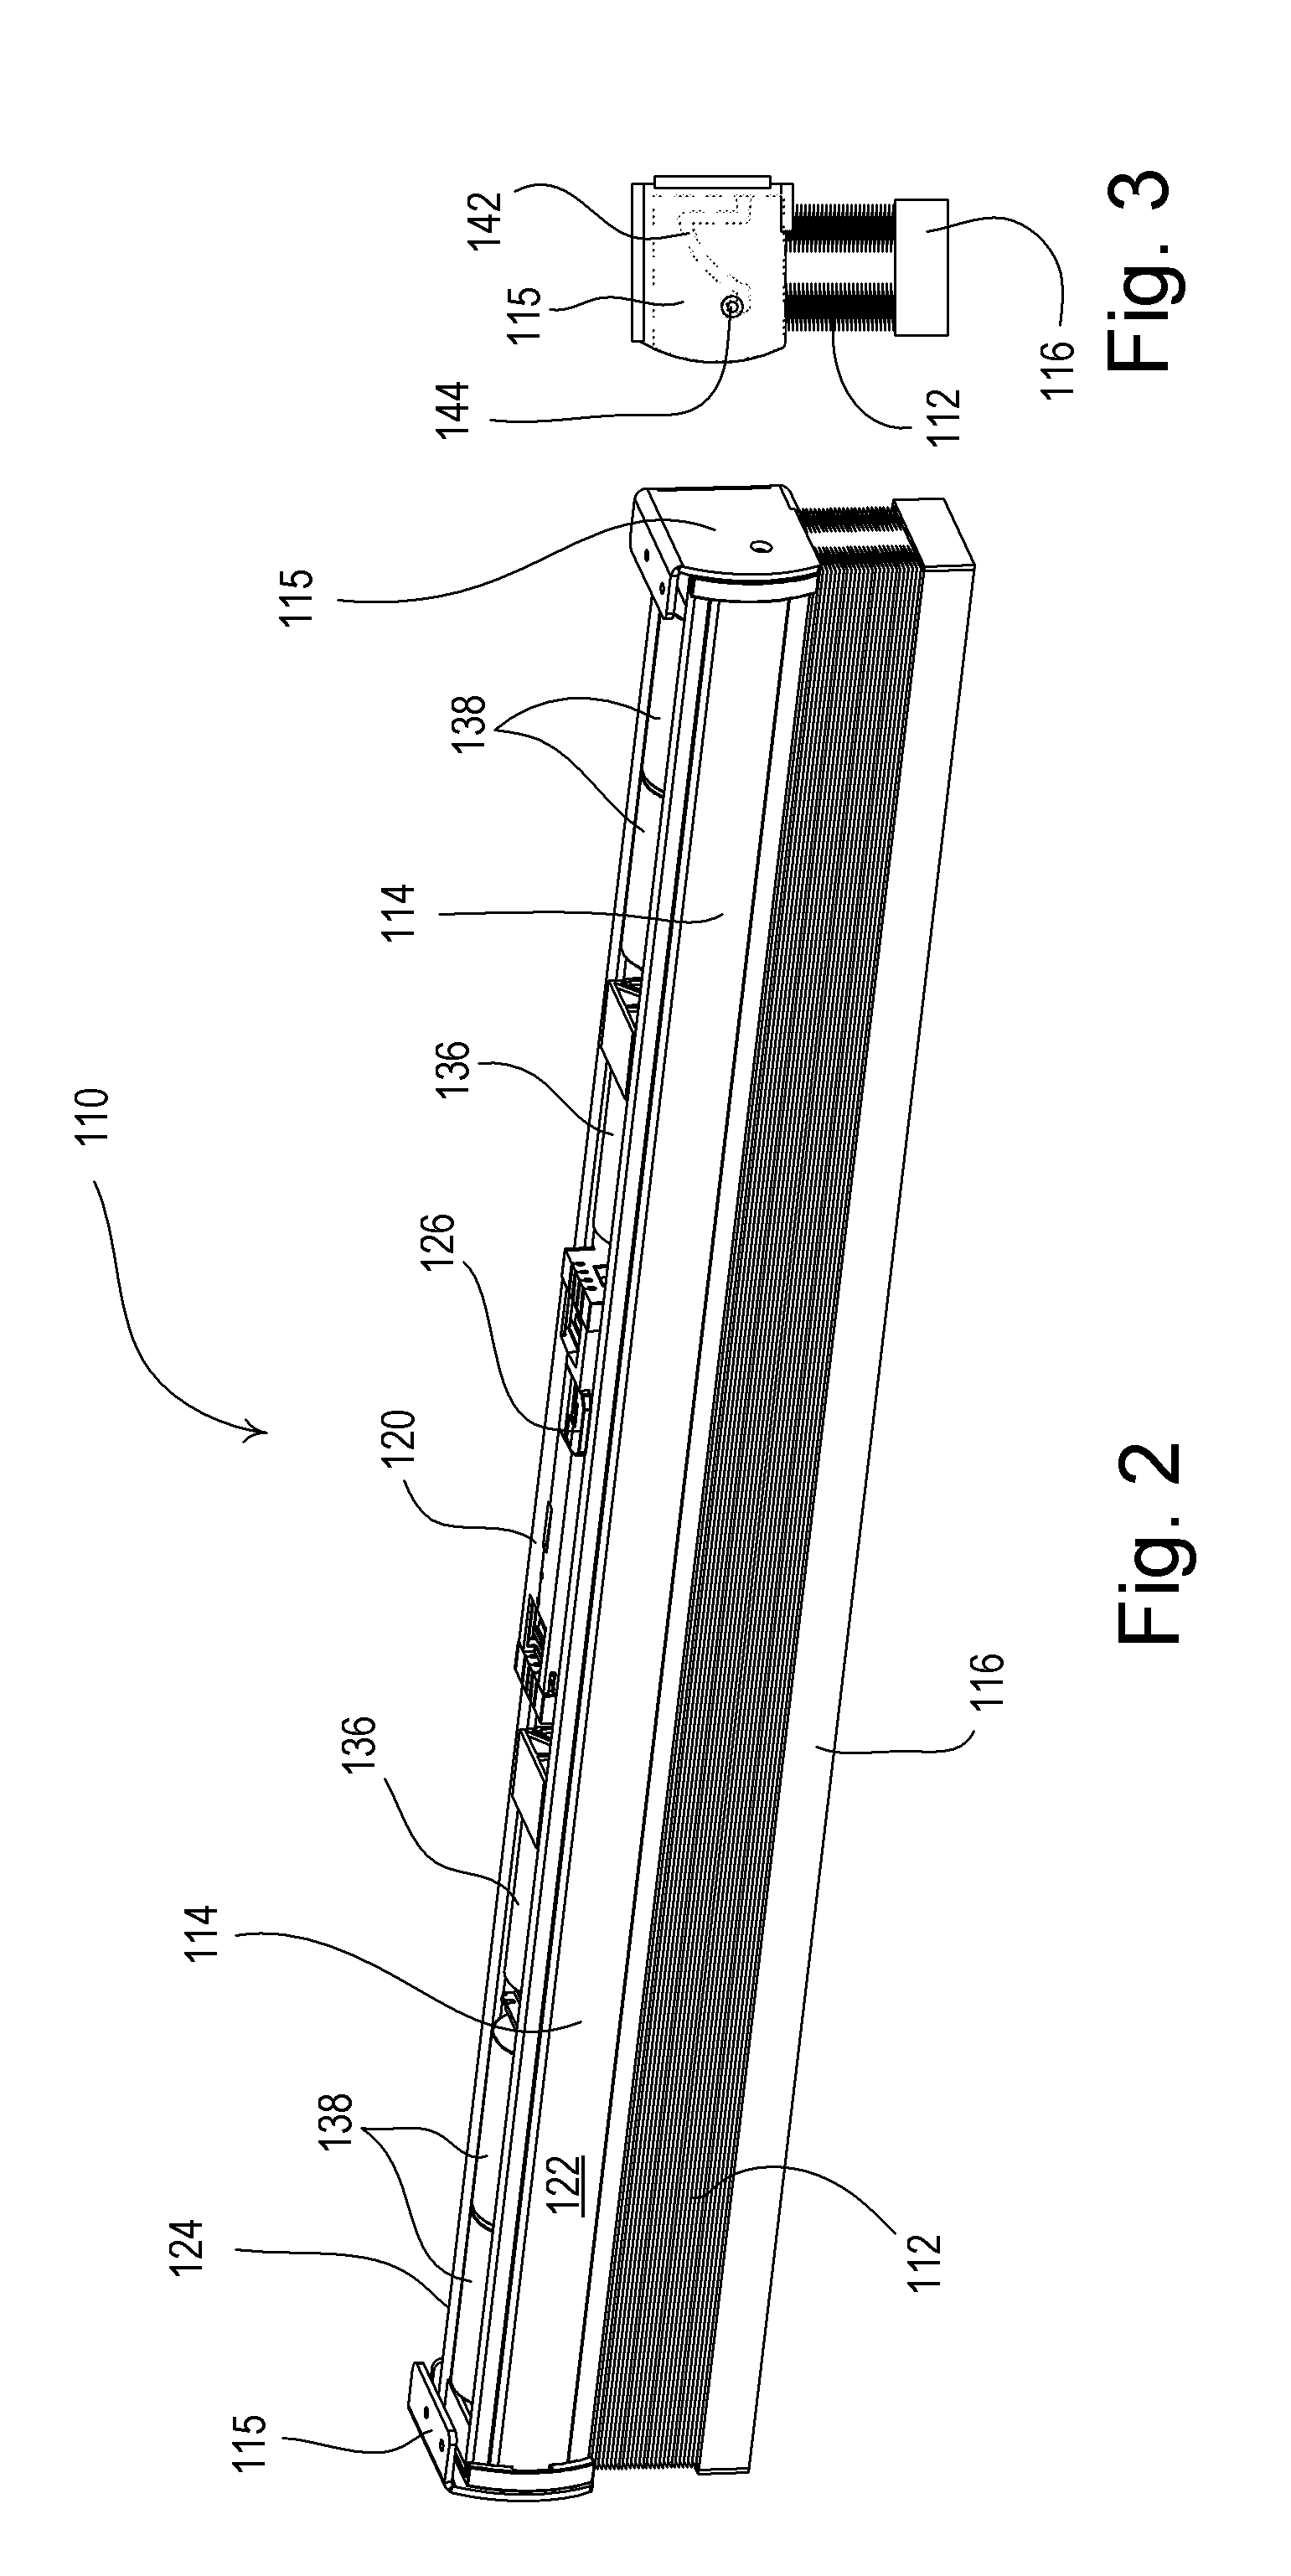 Method of controlling a motorized window treatment to save energy